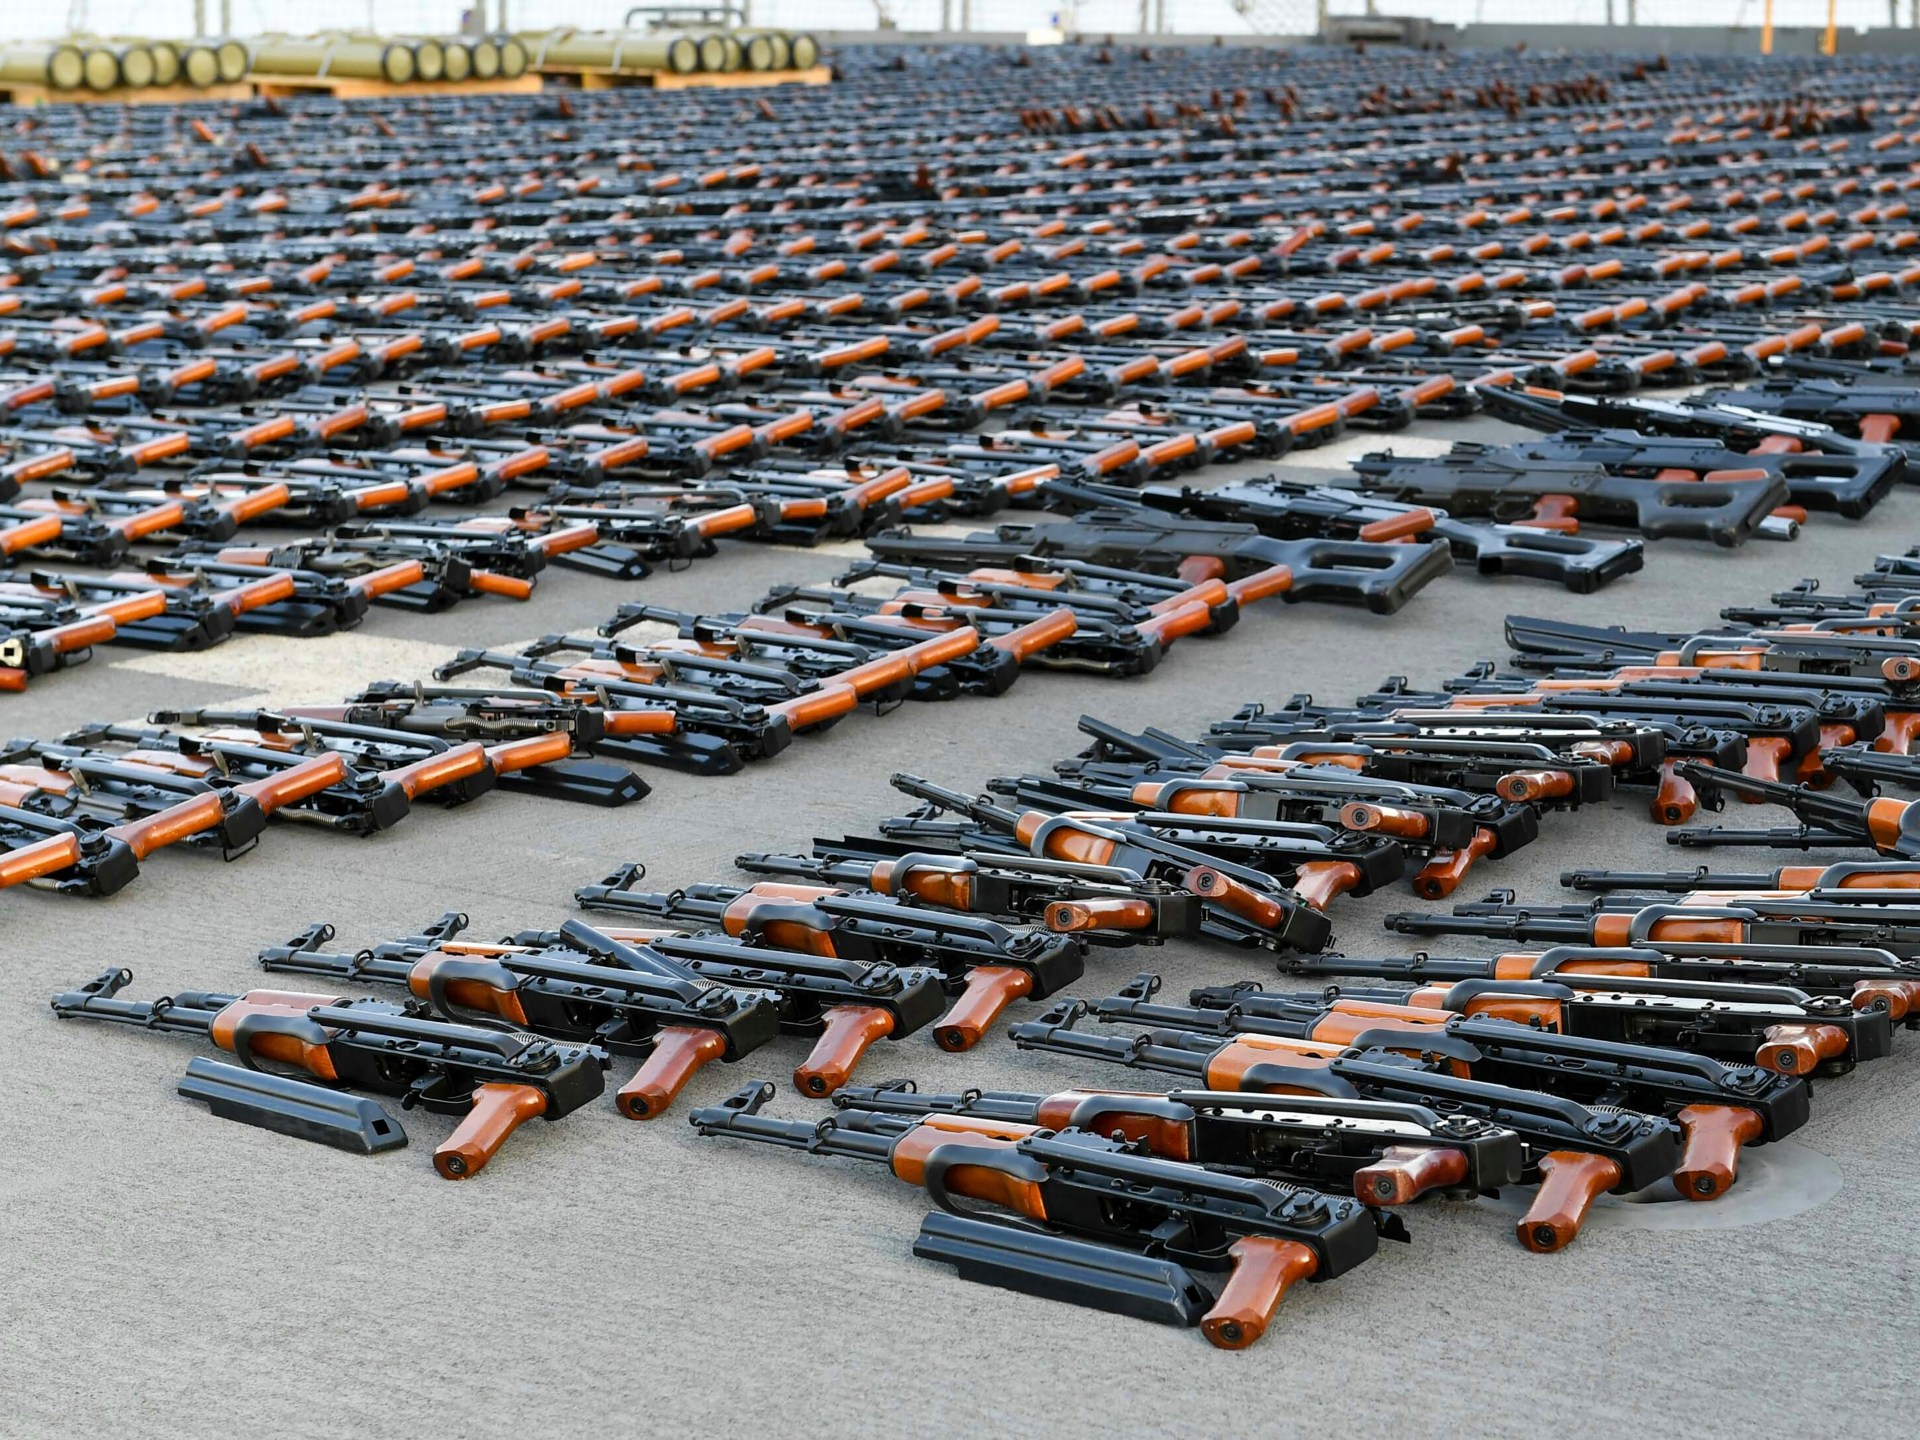 French forces seize shipment of weapons headed from Iran to Yemen